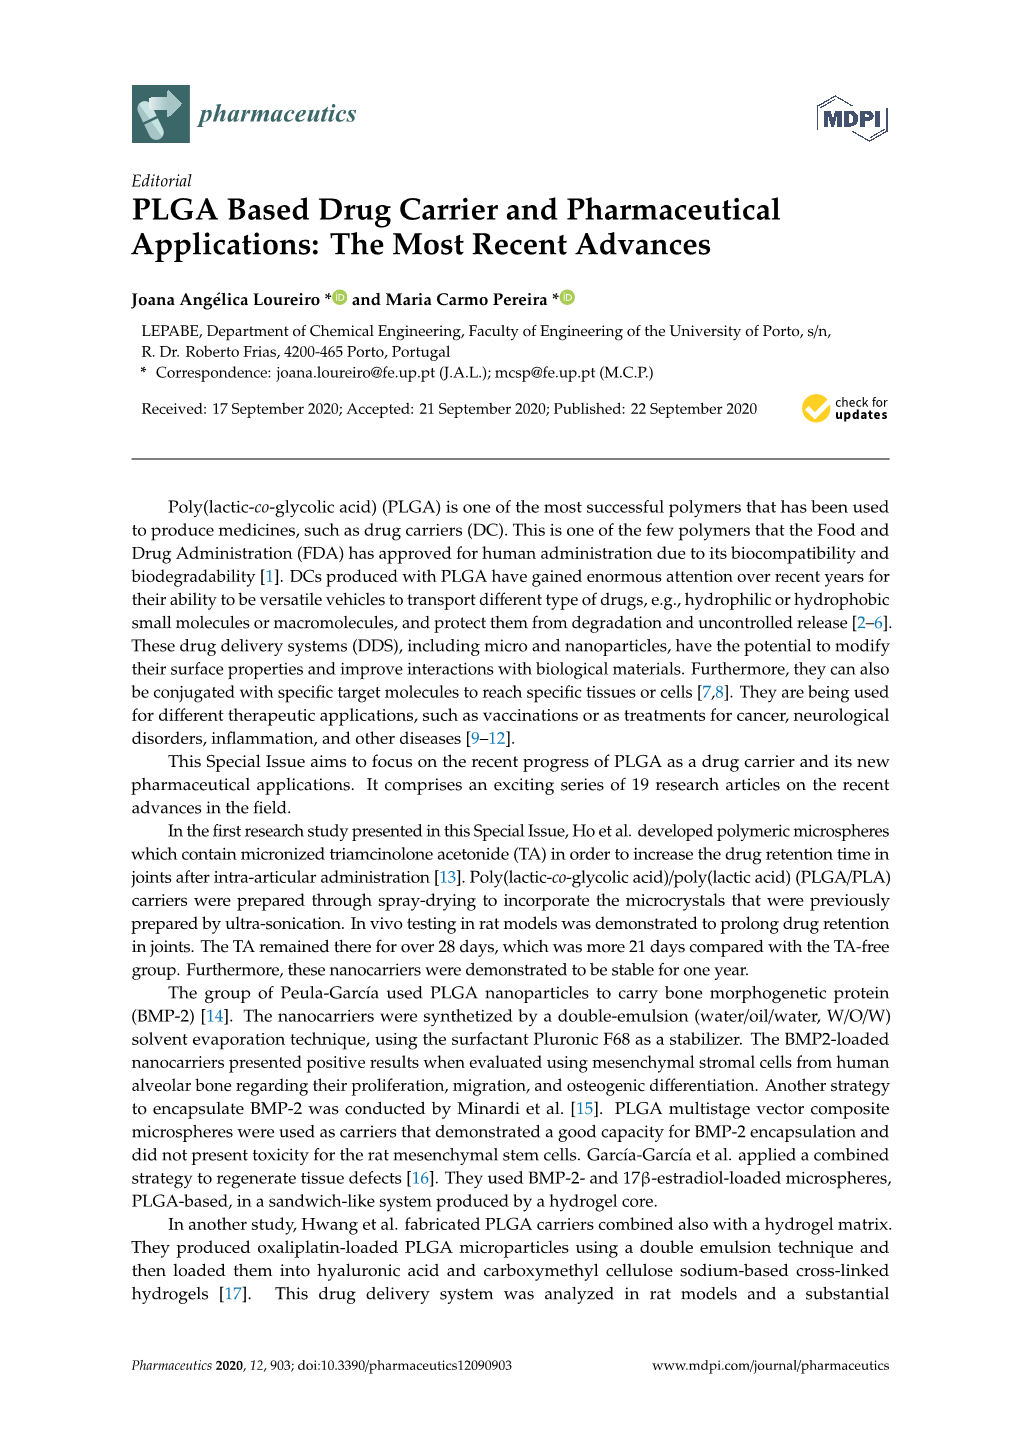 PLGA Based Drug Carrier and Pharmaceutical Applications: the Most Recent Advances